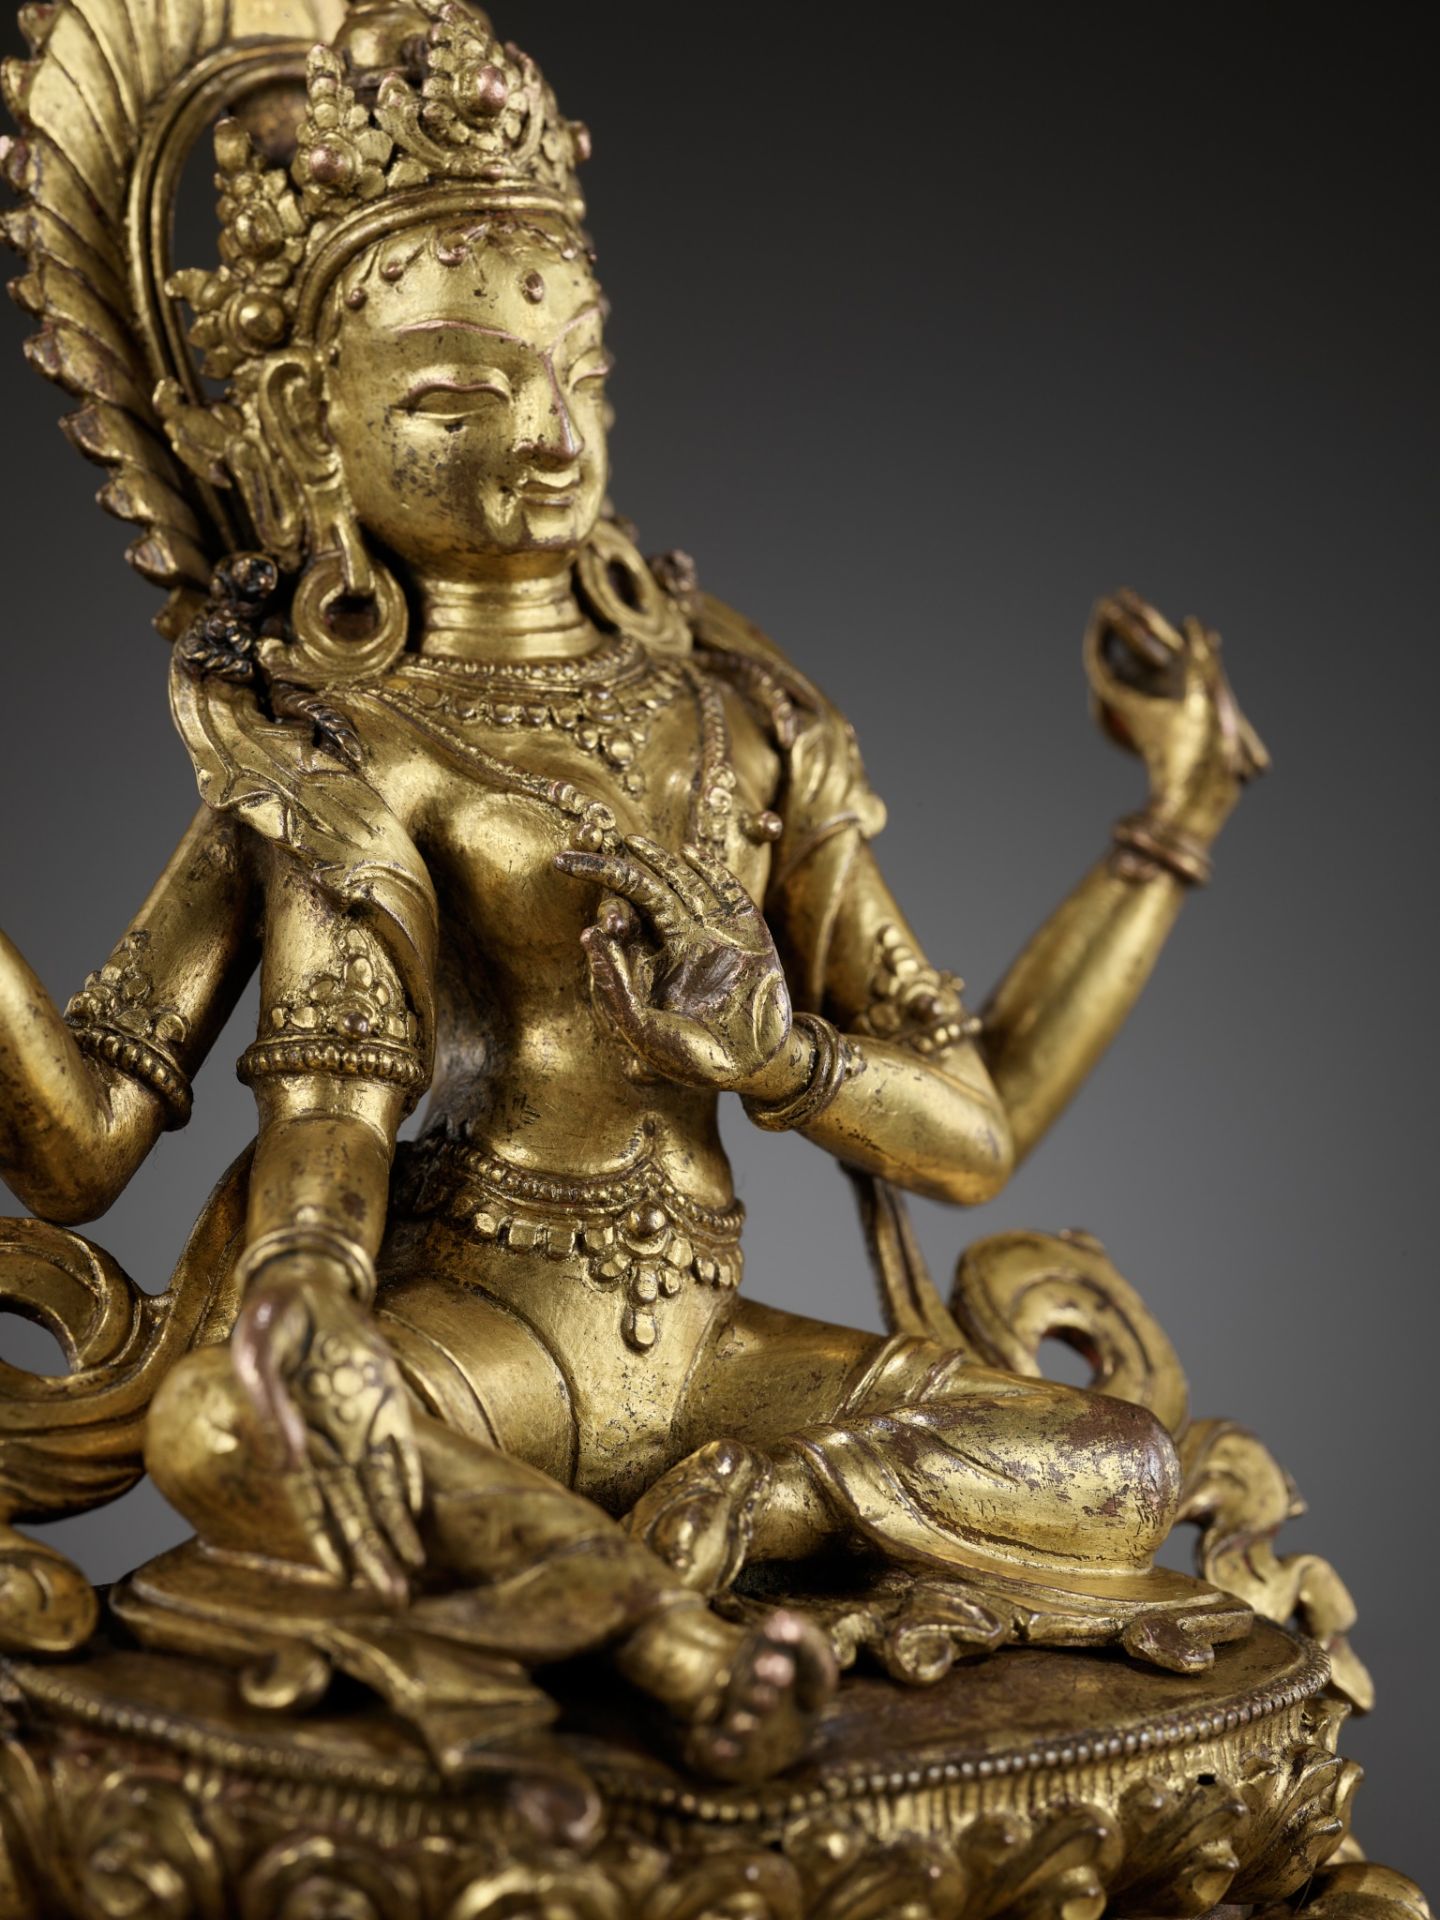 A CAST AND REPOUSSE GILT COPPER ALLOY FIGURE OF TARA, NEPAL, 18TH-19TH CENTURY - Image 6 of 13